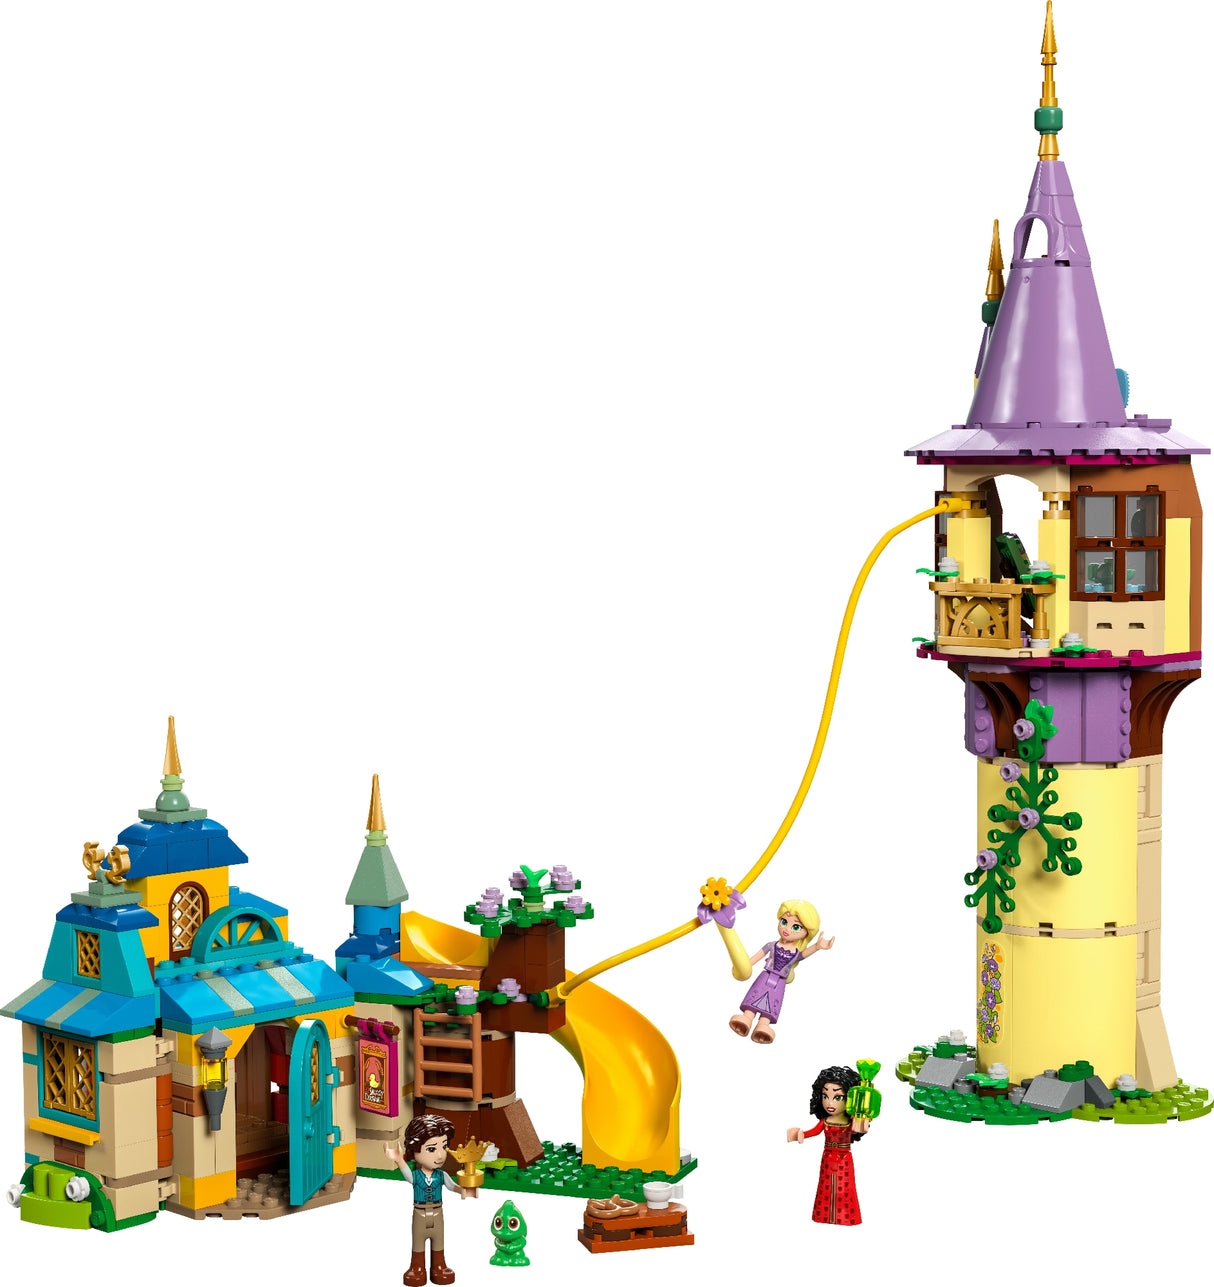 LEGO DISNEY PRINCESS RAPUNZEL'S TOWER & THE SNUGGLY DUCKLING 43241 AGE: 6+